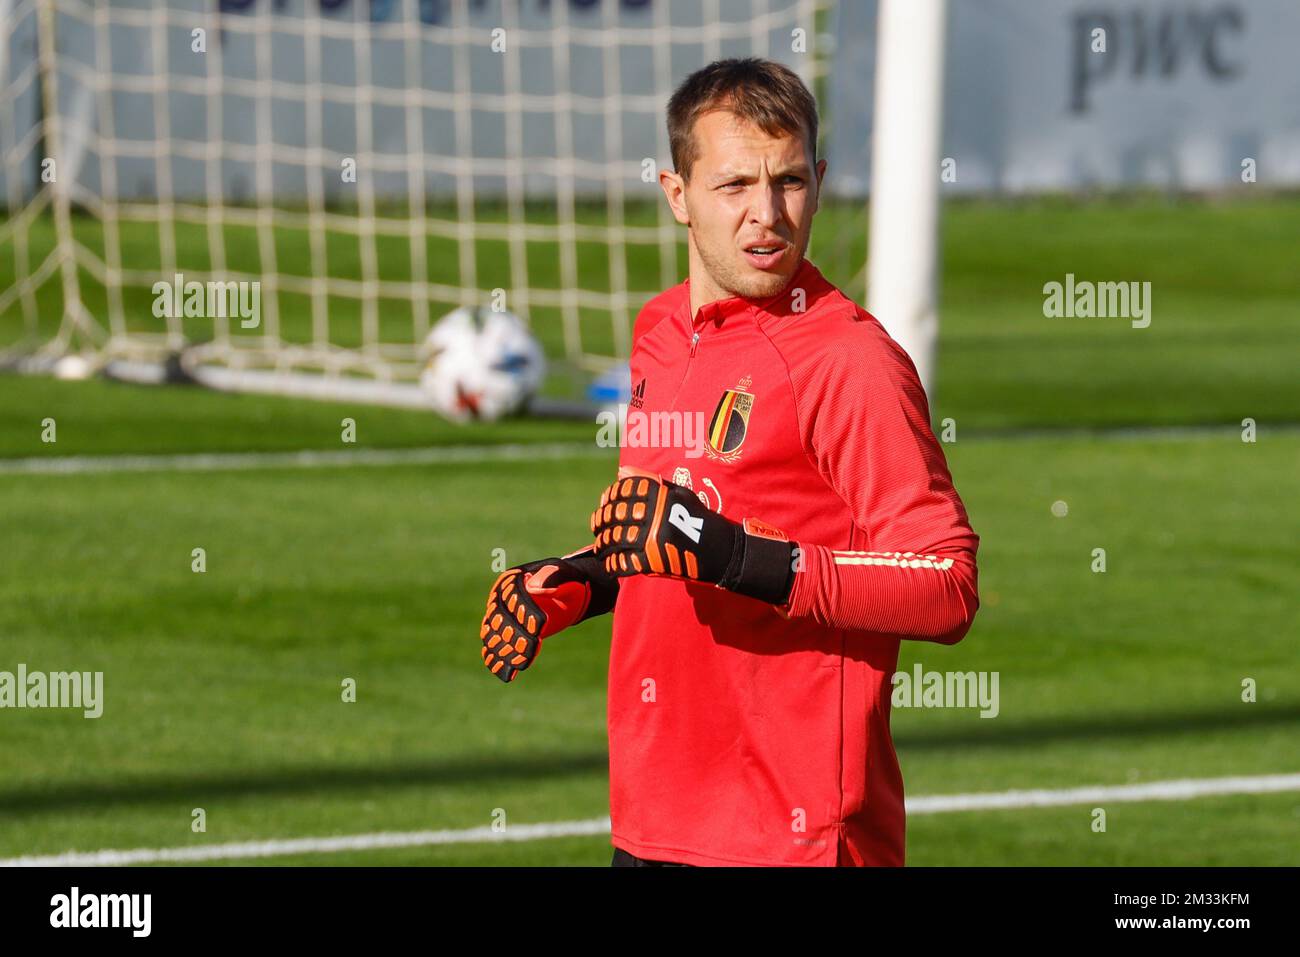 Belgium's goalkeeper Davy Roef pictured during a training session of the Belgian national soccer team Red Devils, part of the preparations for the upcoming games, Wednesday 07 October 2020 in Tubize. Tomorrow the team will meet Ivory Coast in a friendly fixture, later they'll be playing two European Cup 2020 qualification games against England and Iceland. BELGA PHOTO BRUNO FAHY Stock Photo